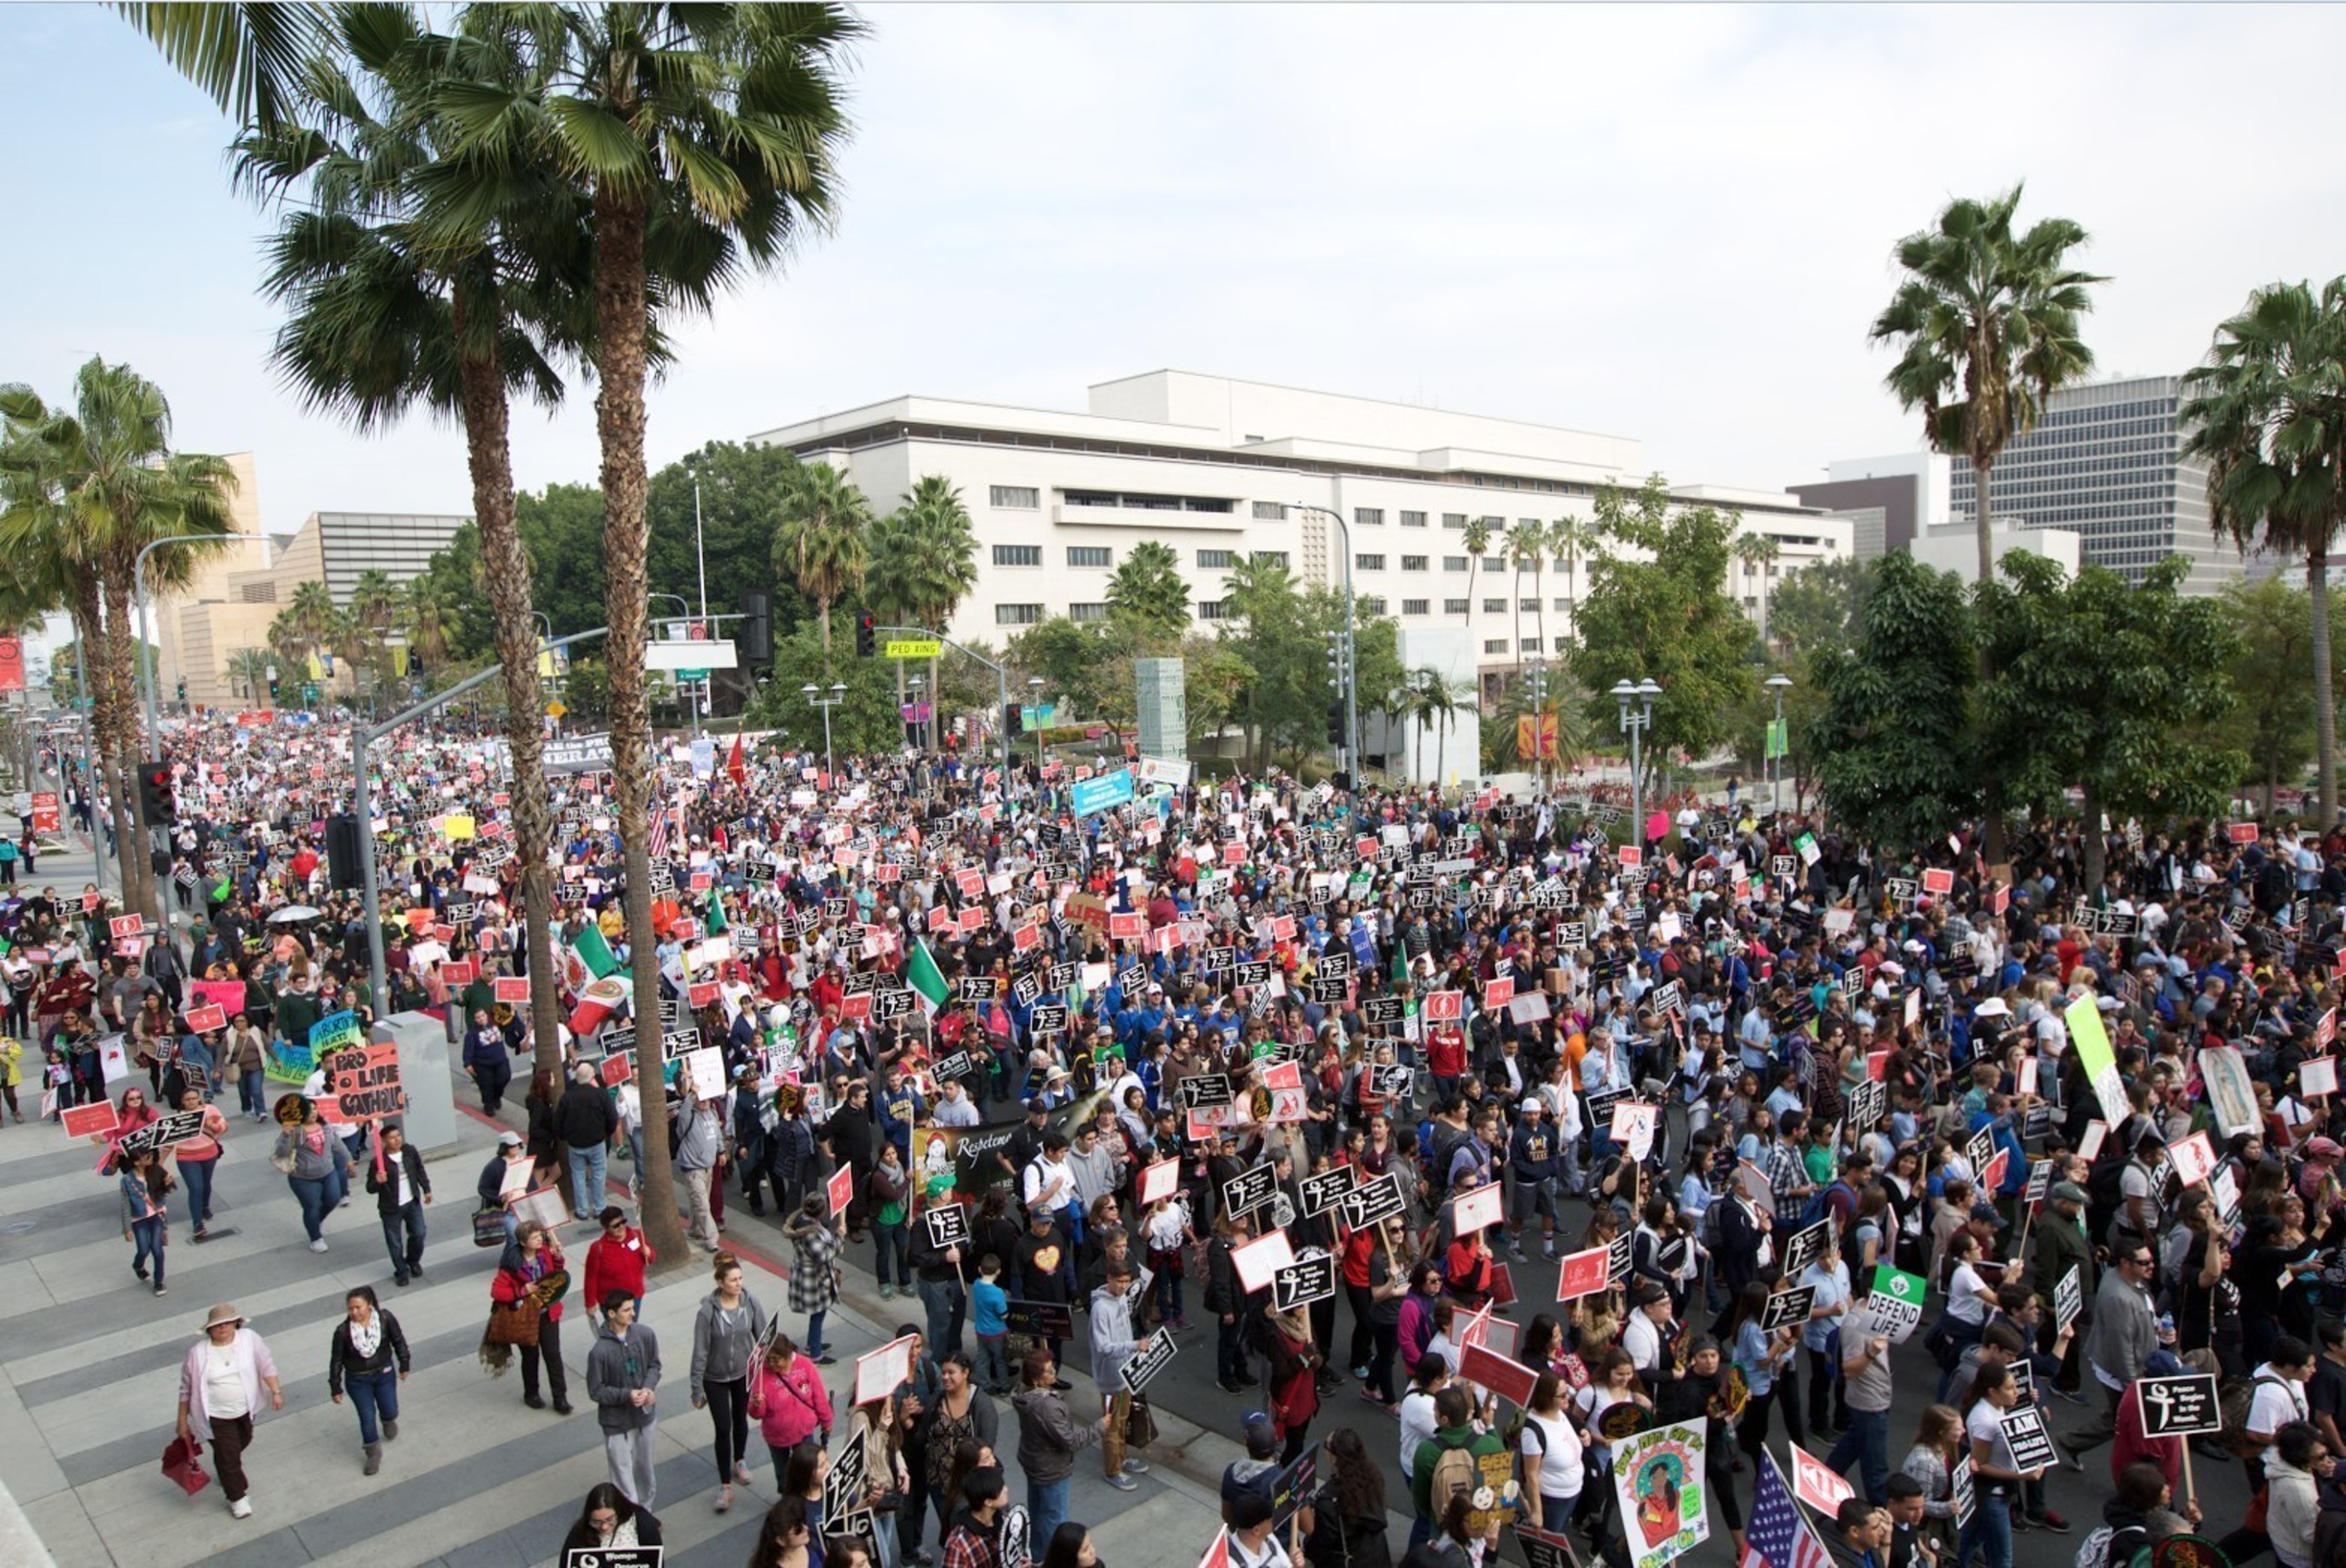 More than 15,000 gather for OneLife LA on Saturday, January 23rd.